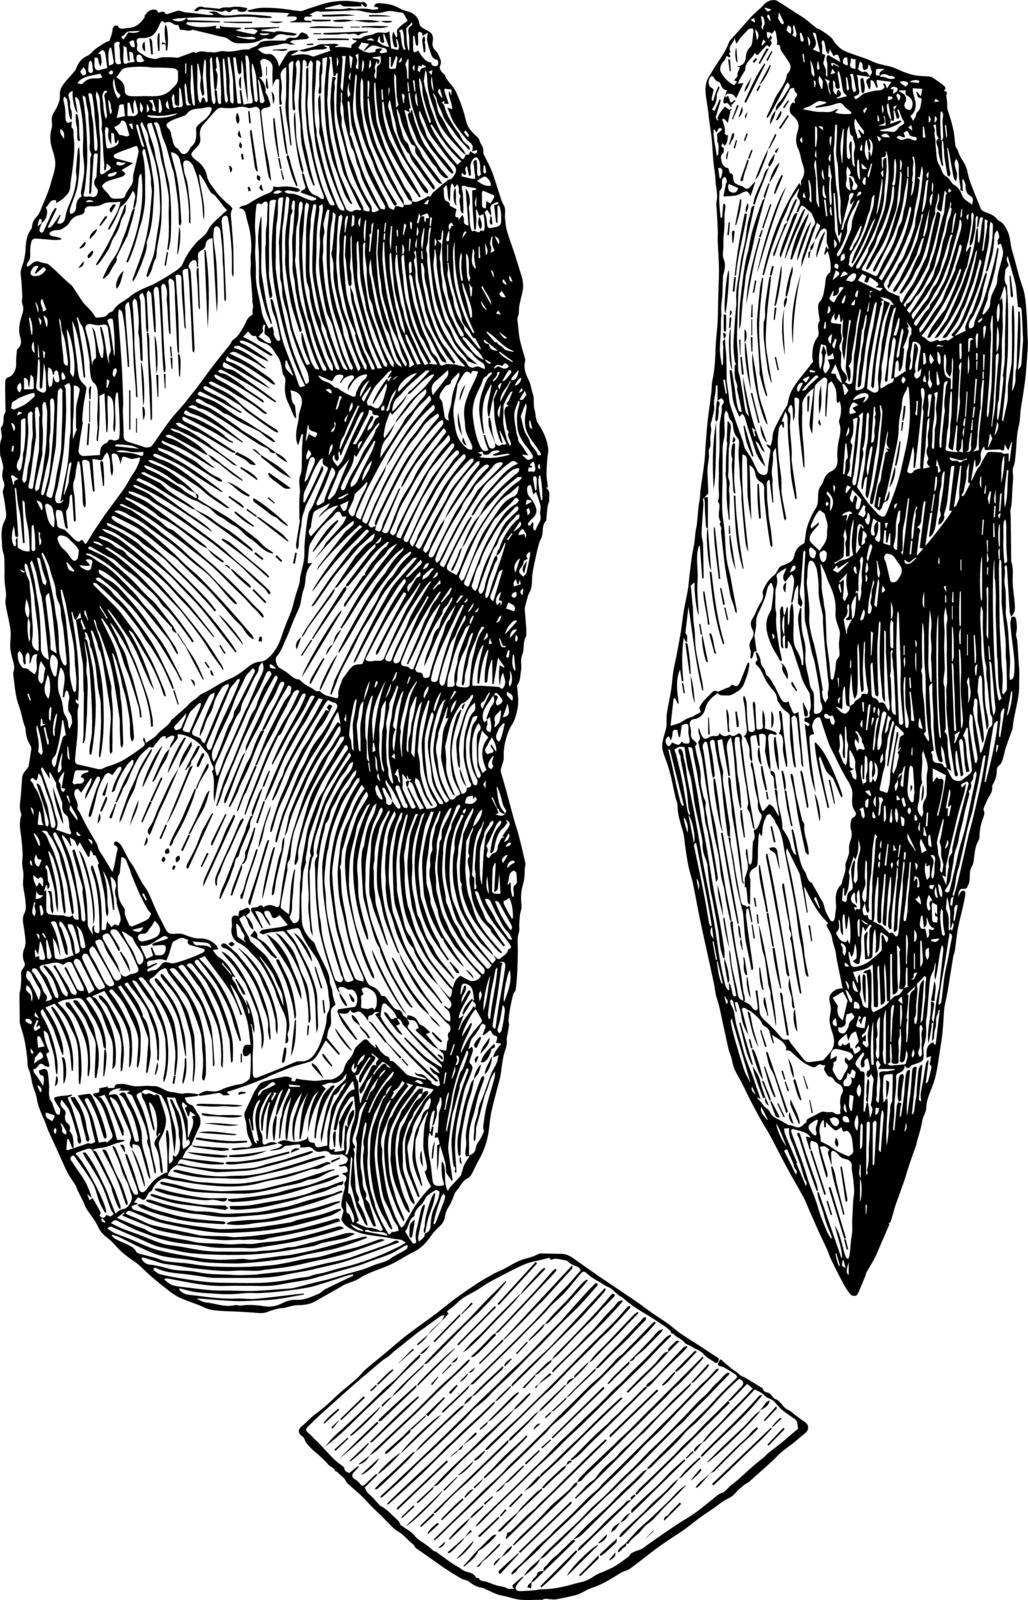 This image shows the Neolithic tool. There are 3 Neolithic tools. All the tools are full of black lines, vintage line drawing or engraving illustration.